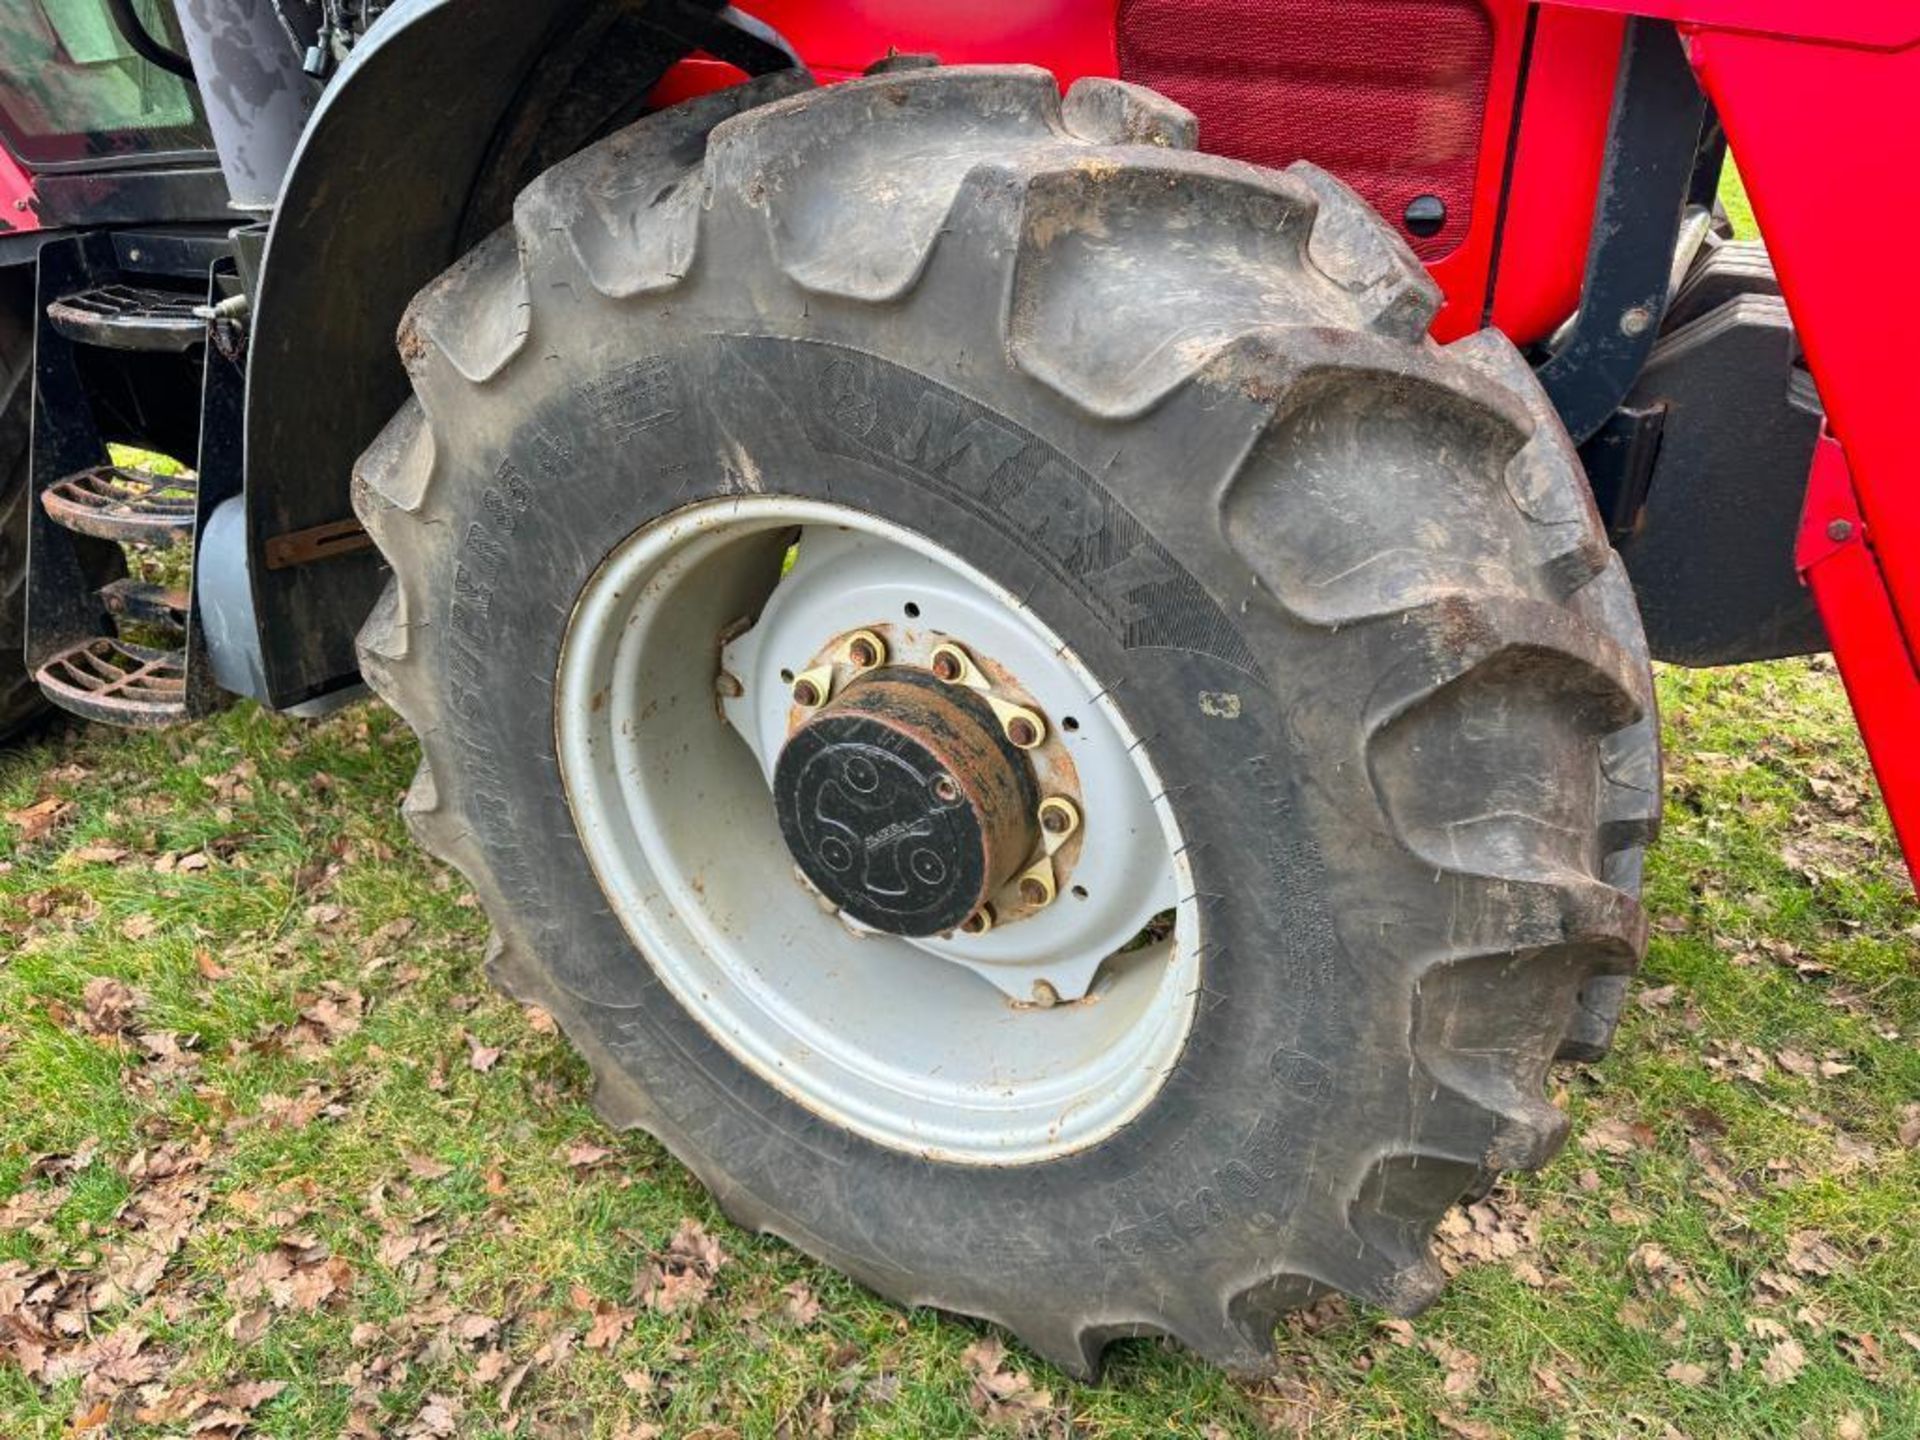 2005 Massey Ferguson 6480 Dynashift 4wd 40kph tractor with 3 manual spools, 10No front wafer weights - Image 20 of 26